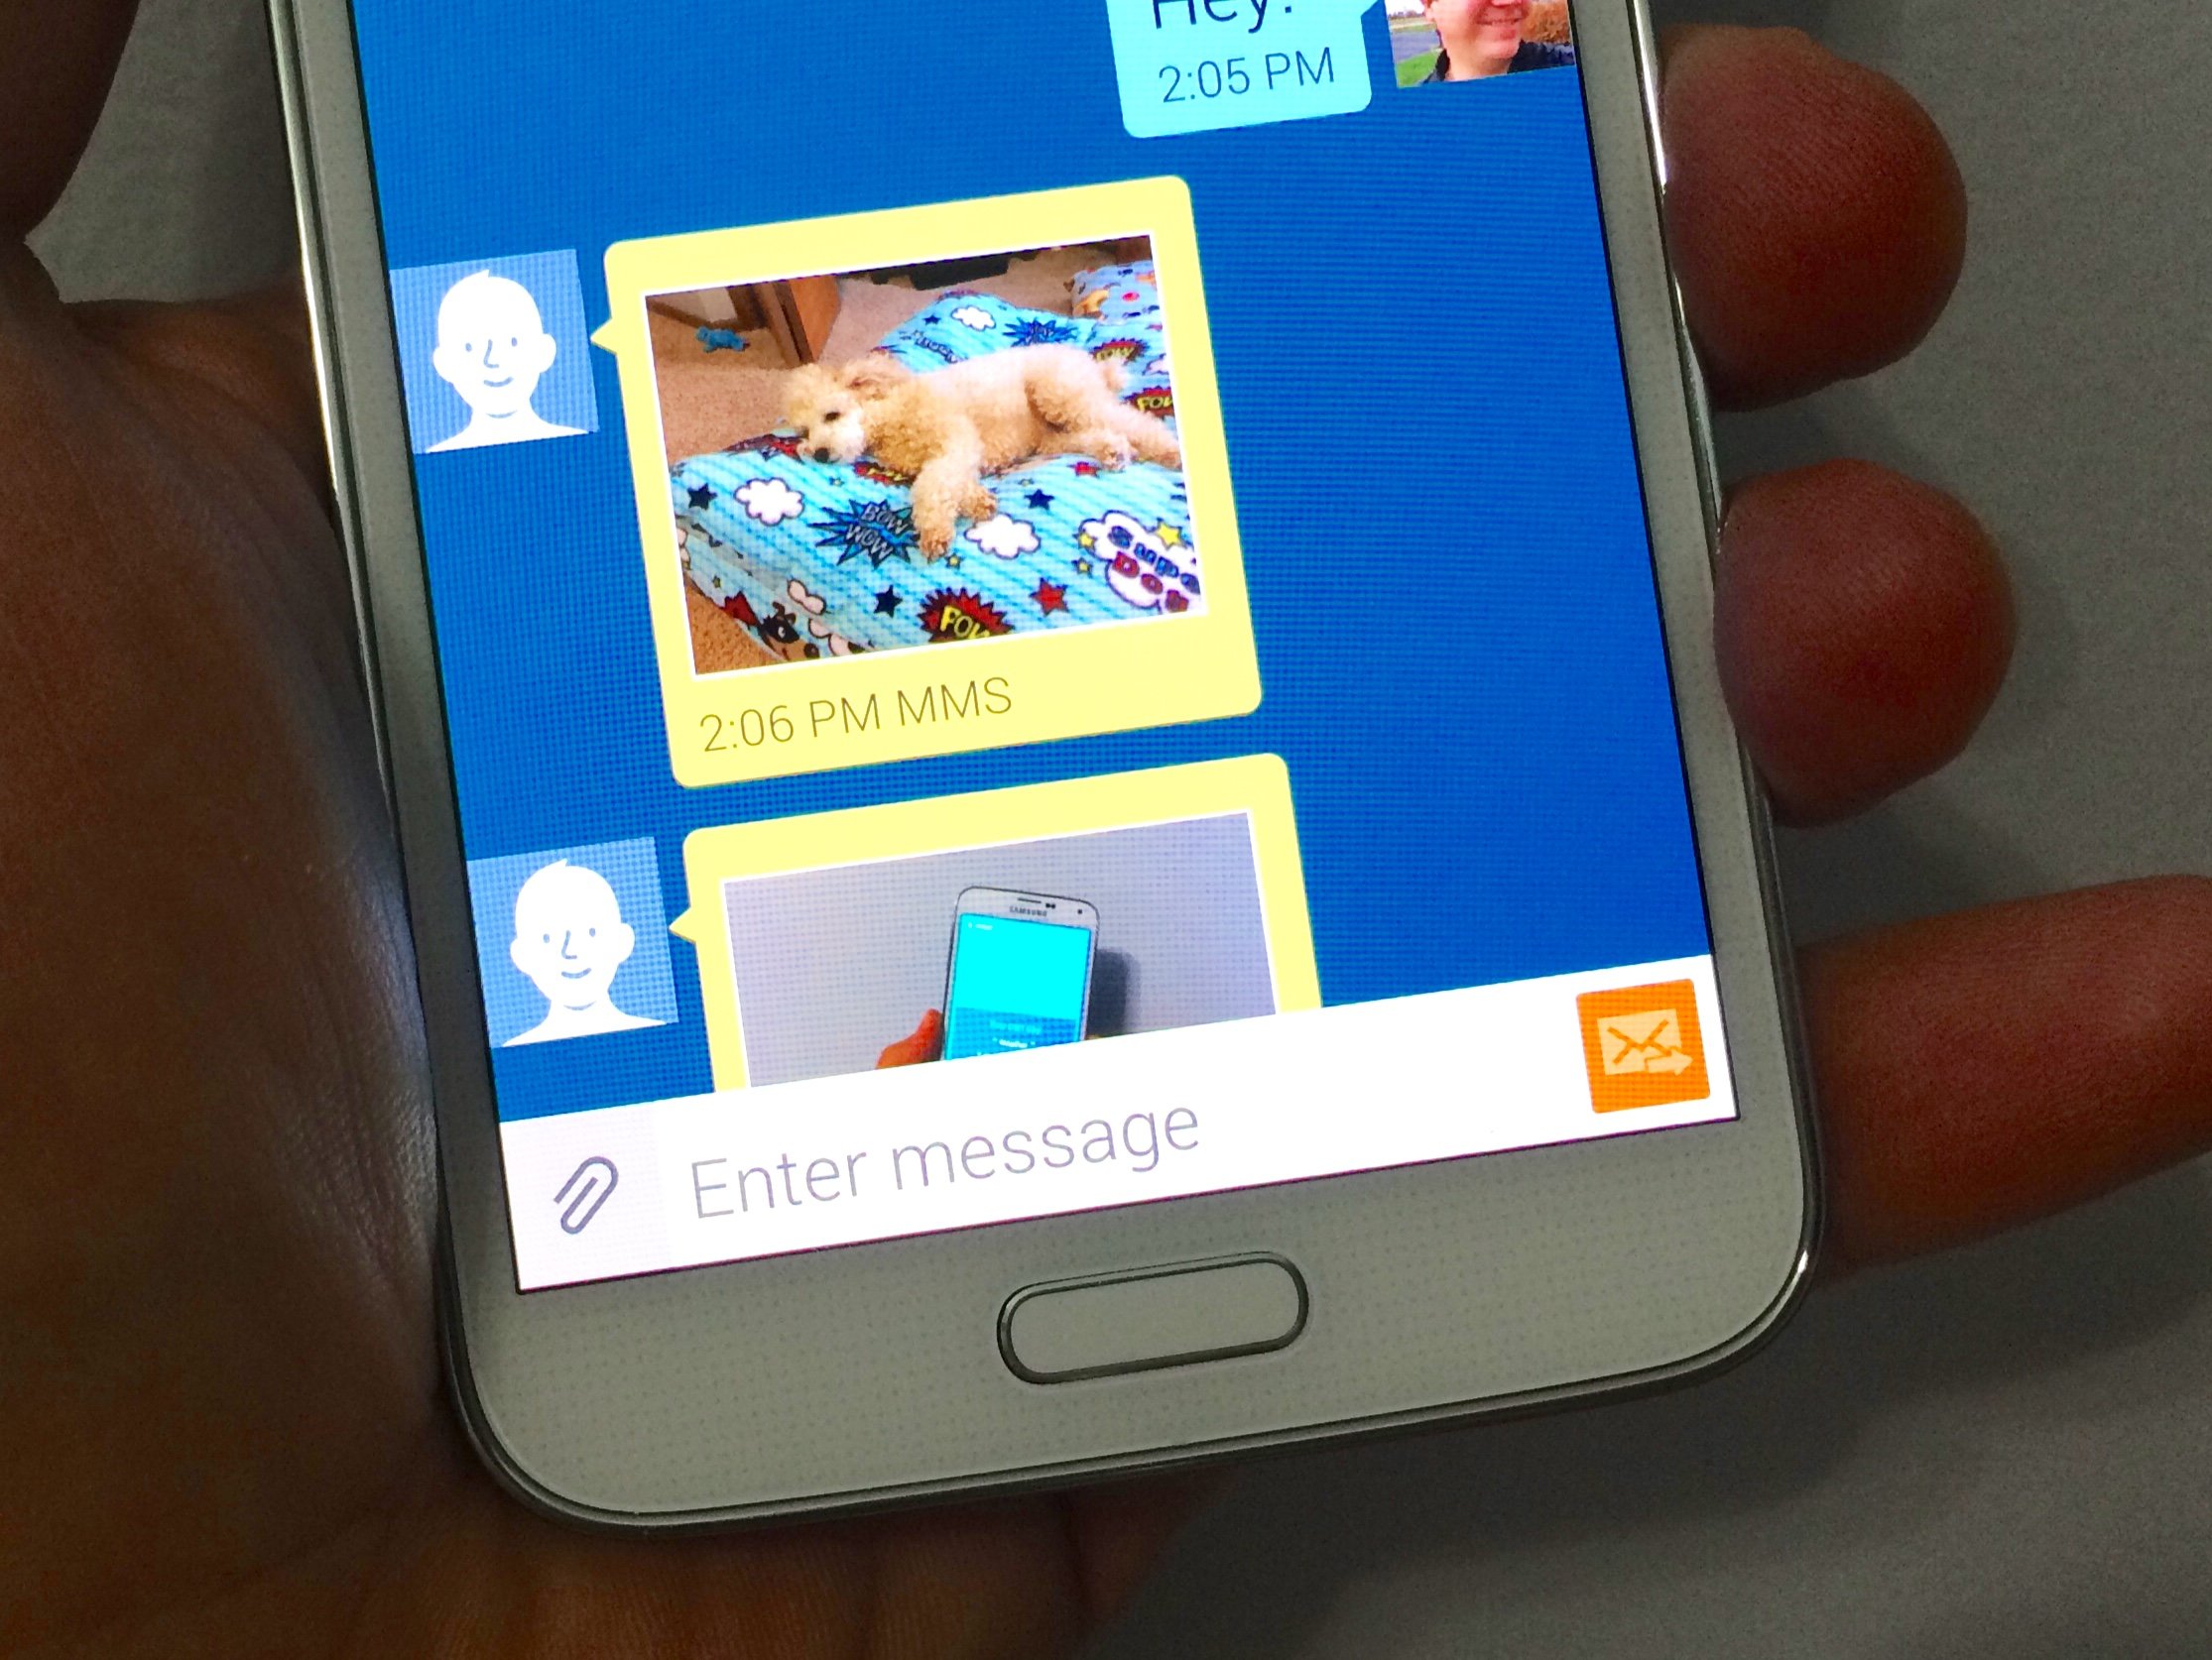 Here's how to save a photo on the Galaxy S5 that you get as a text message.